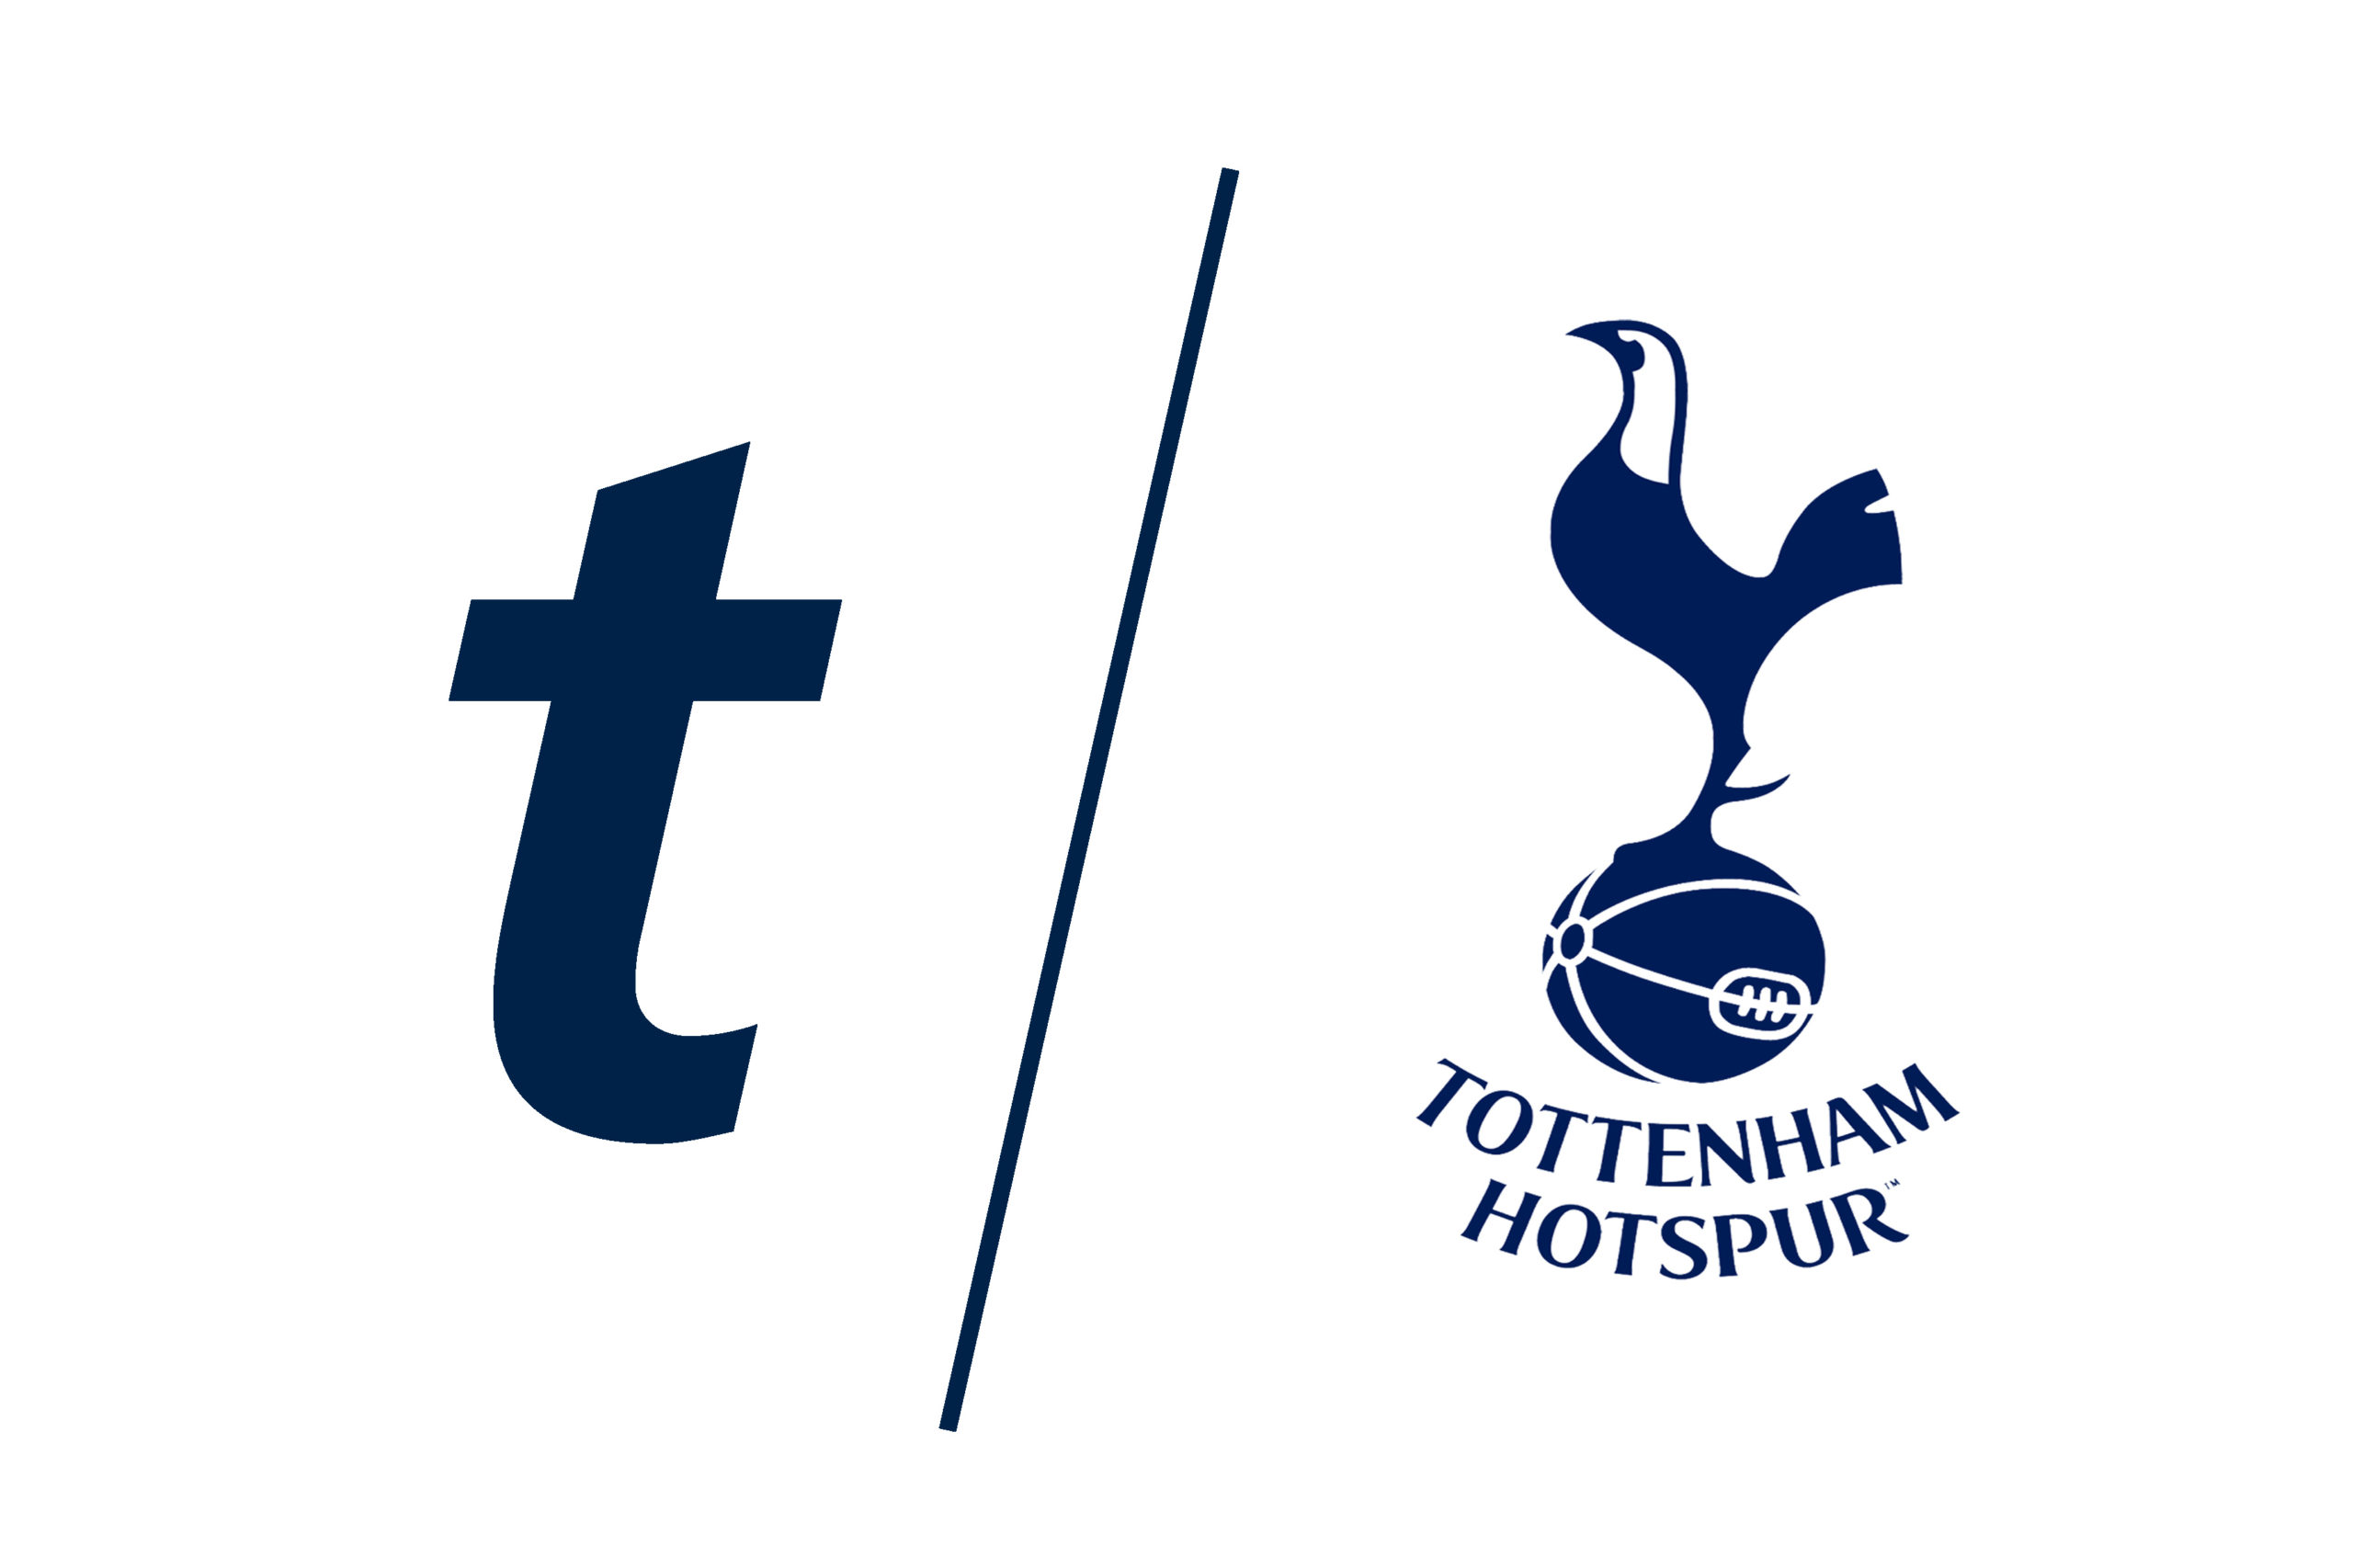 Tottenham Hotspur and Ticketmaster Sport launch new partnership to drive ticketing technology innovation